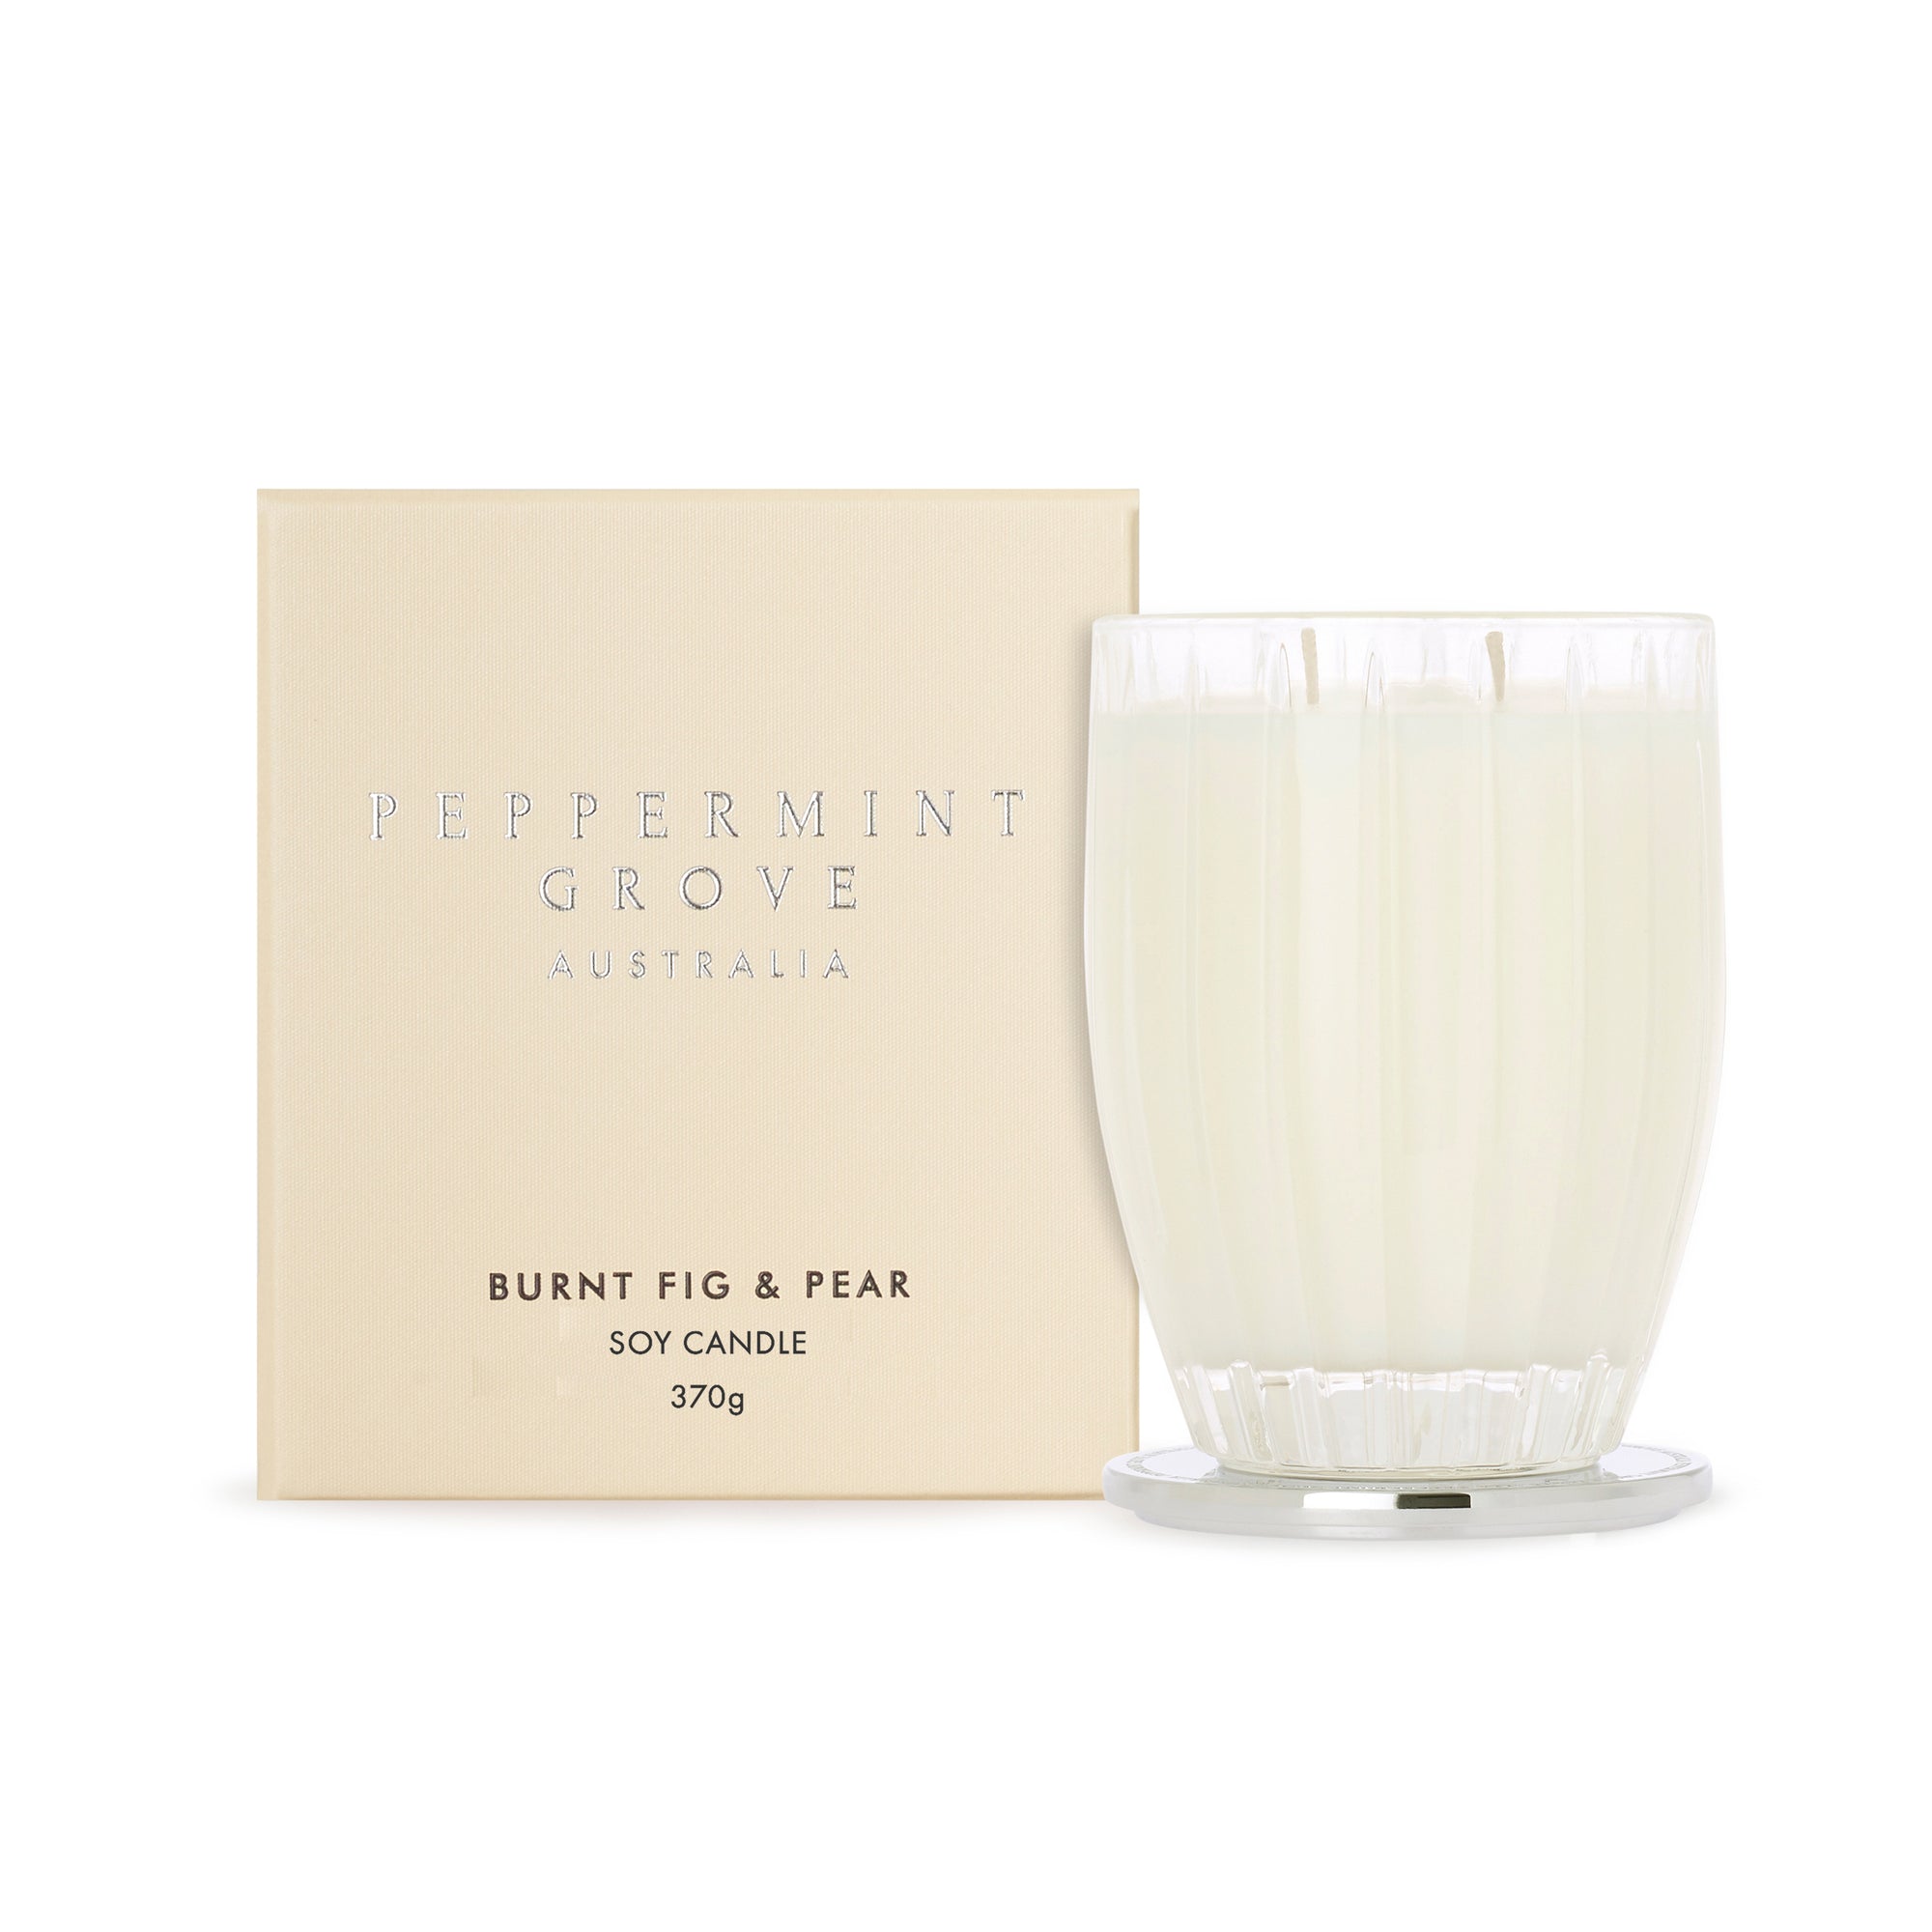 Peppermint Grove Burnt Fig & Pear Large Soy Candle 370g